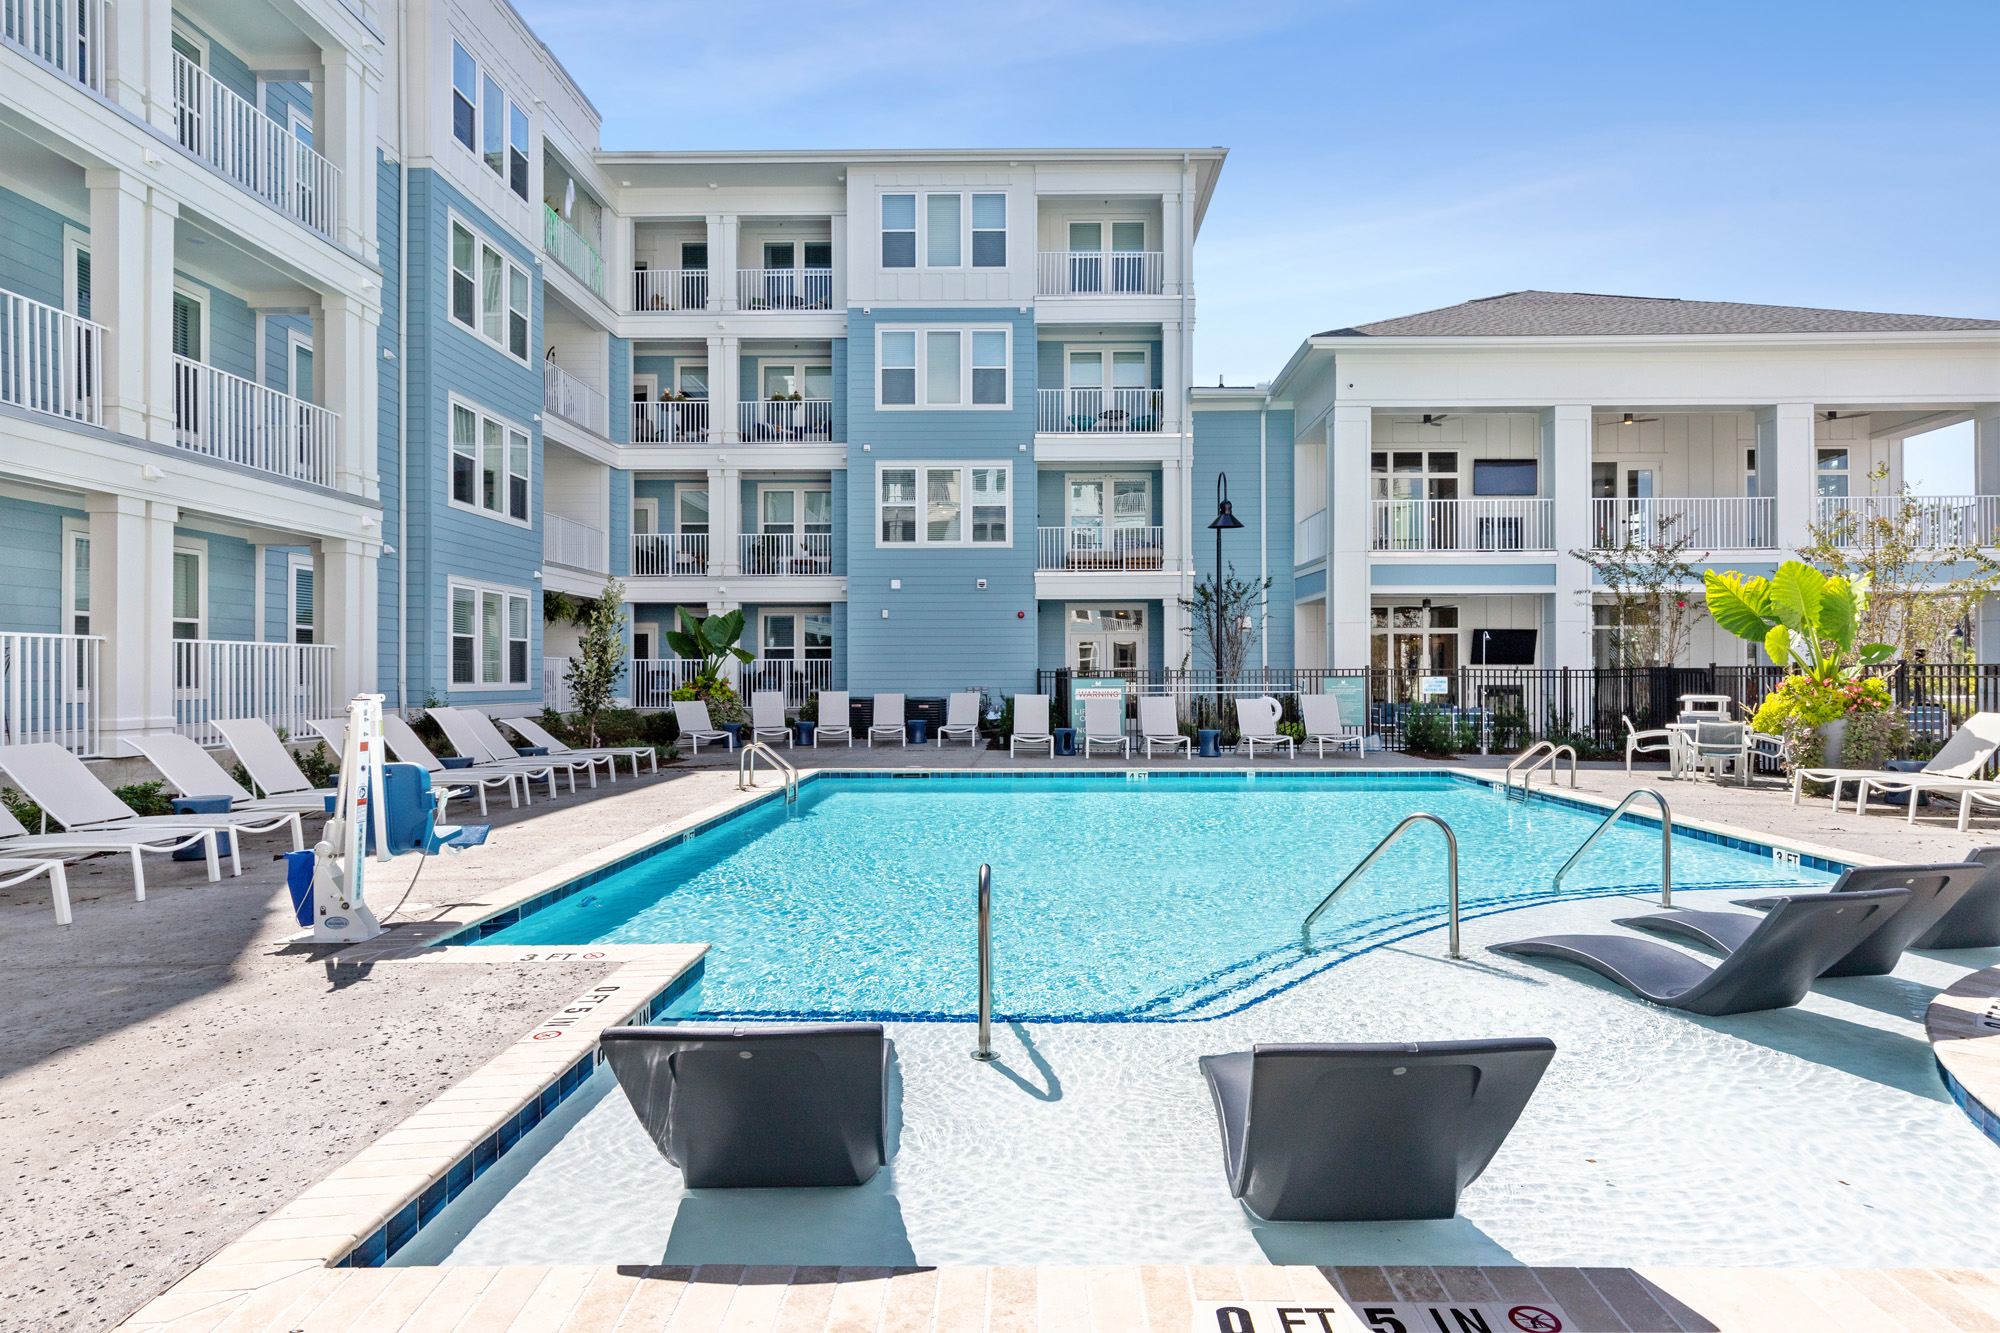 Oasis at Riverlights - Amenities